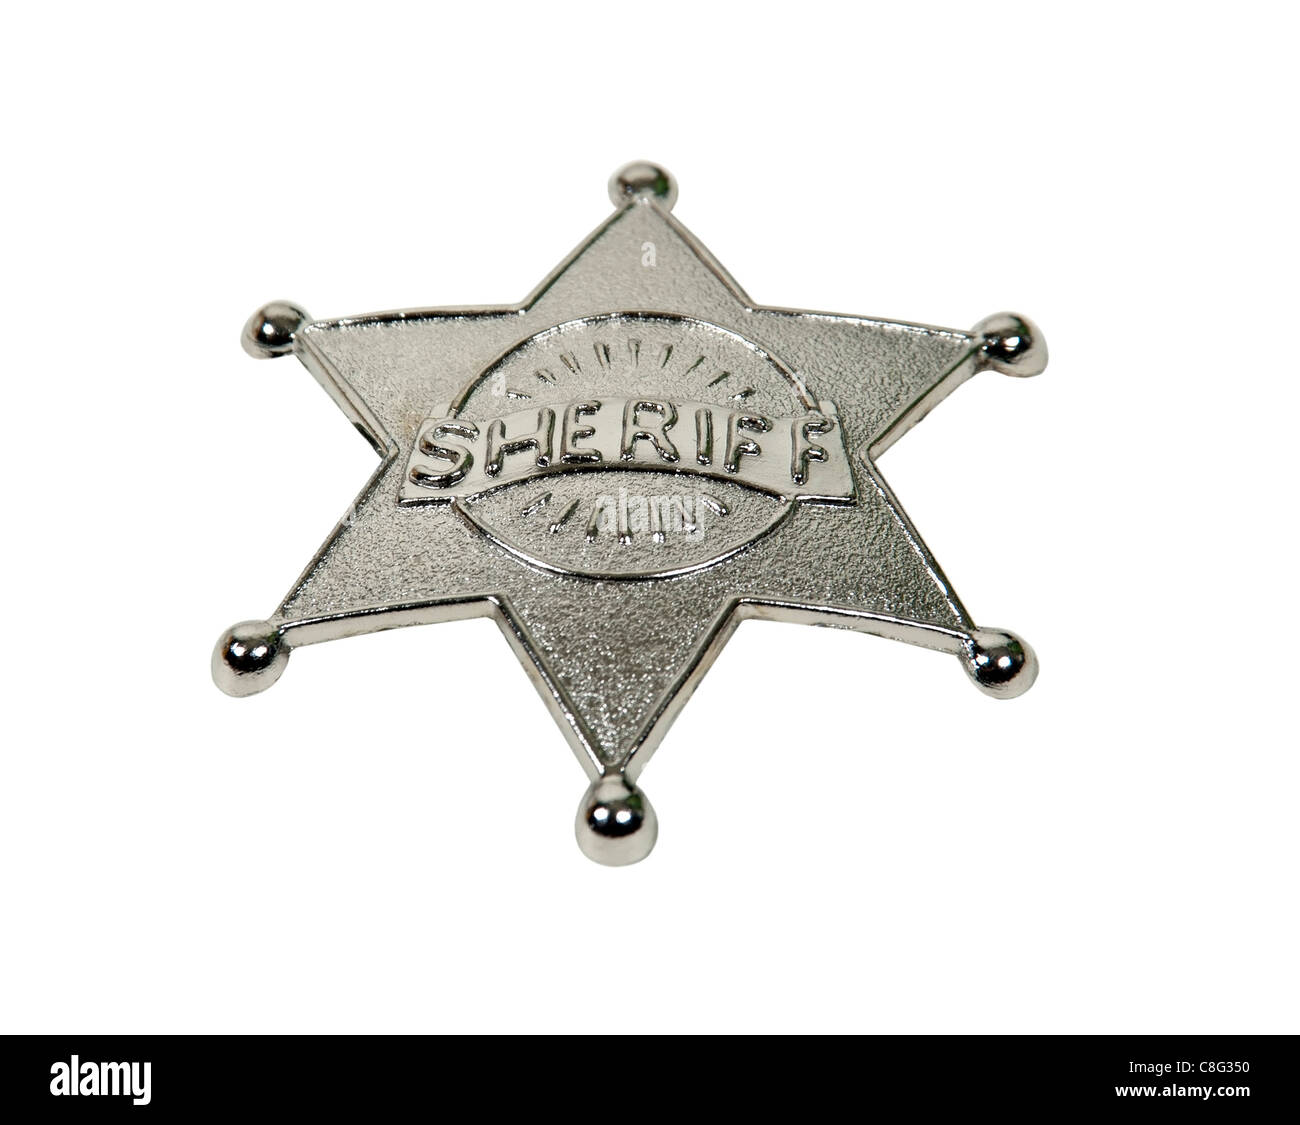 Silver five pointed star sheriff badge with raised lettering - path included Stock Photo